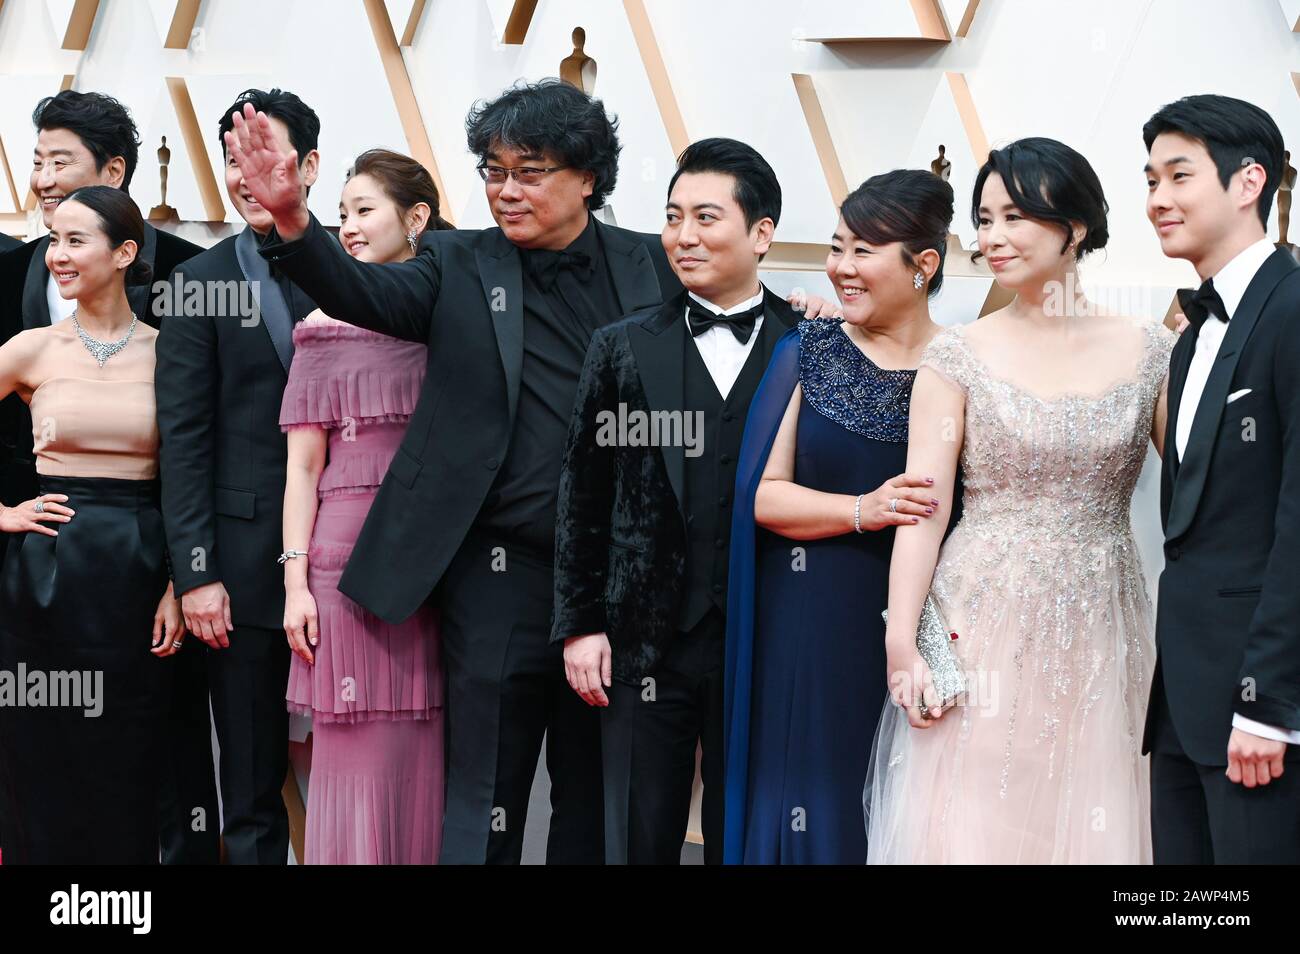 Parasite director Bong Joon Ho and cast members walking on the red carpet at the 92nd Annual Academy Awards held at the Dolby Theatre in Hollywood, California on Feb. 9, 2020. (Photo by Anthony Behar/Sipa USA) Stock Photo